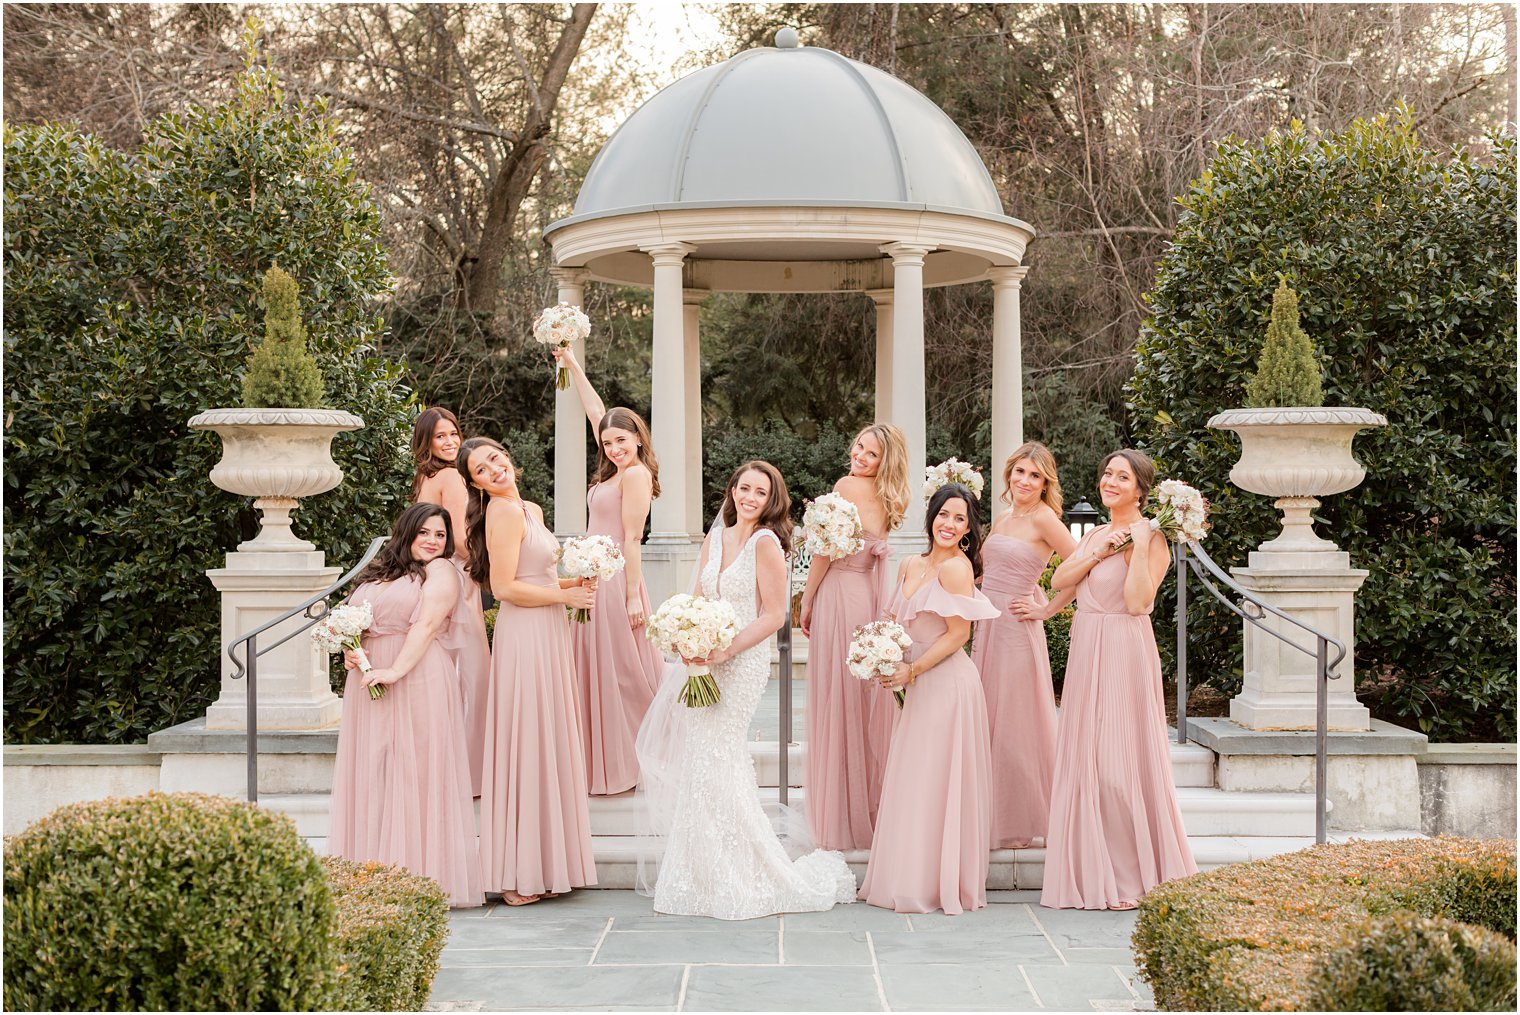 bride and bridesmaids pose by gazebo in gardens at Park Chateau Estate 